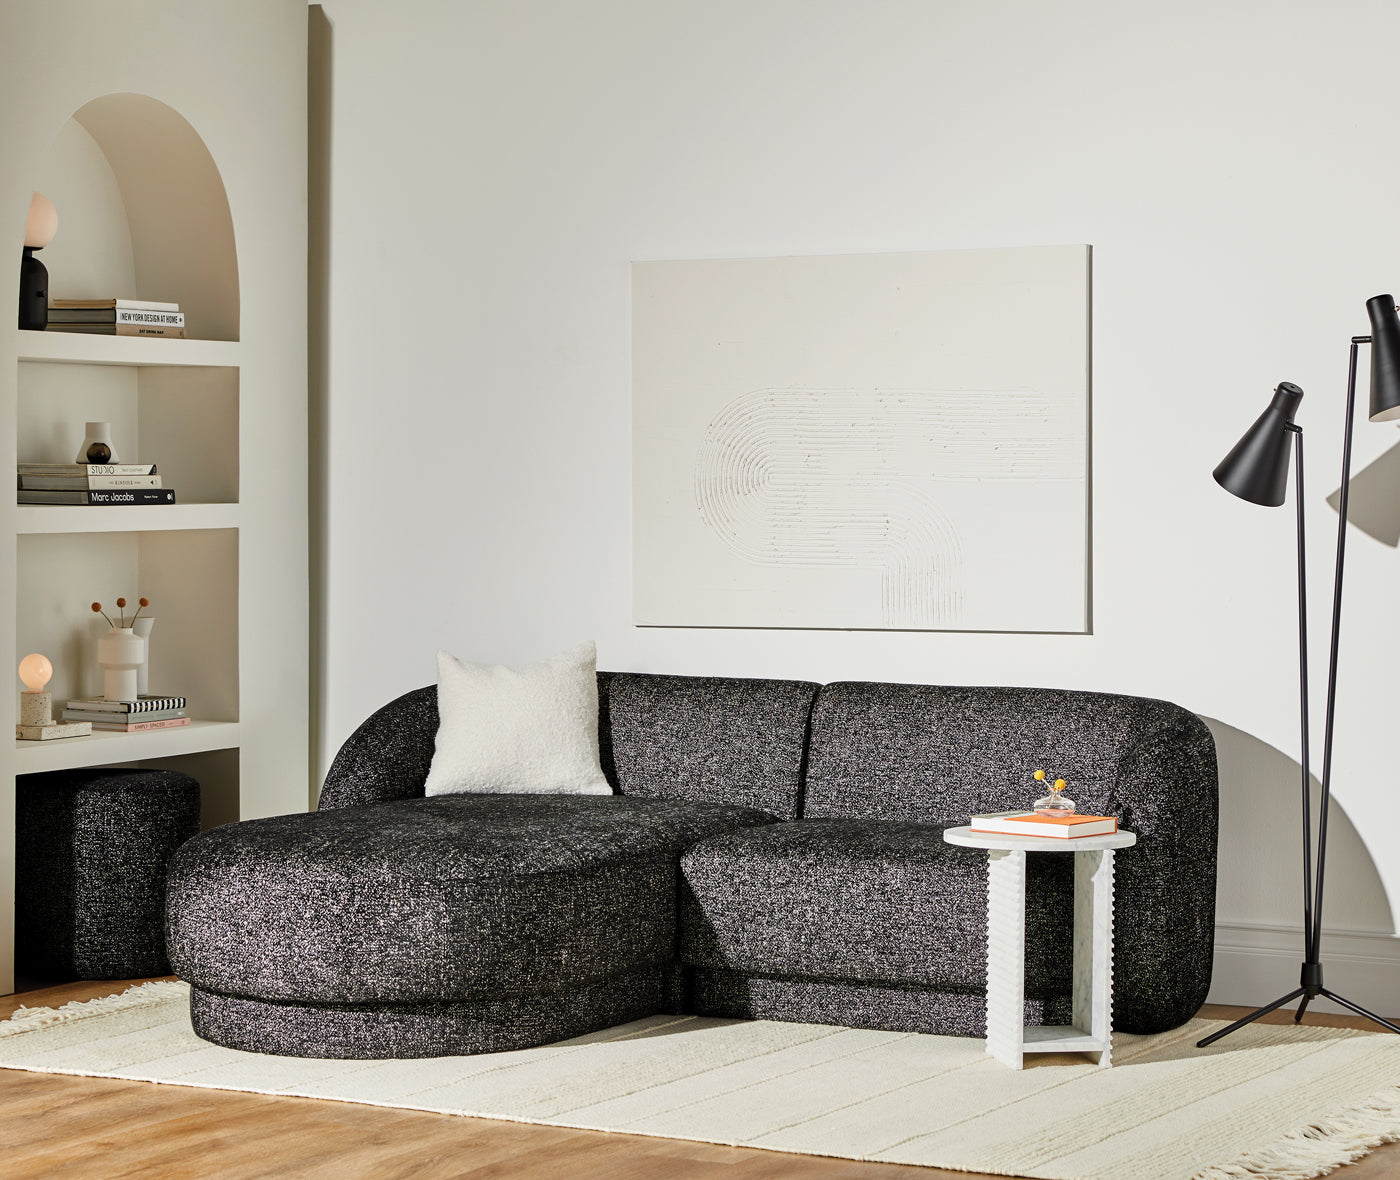 Seraphina Modular Chaise - More Options